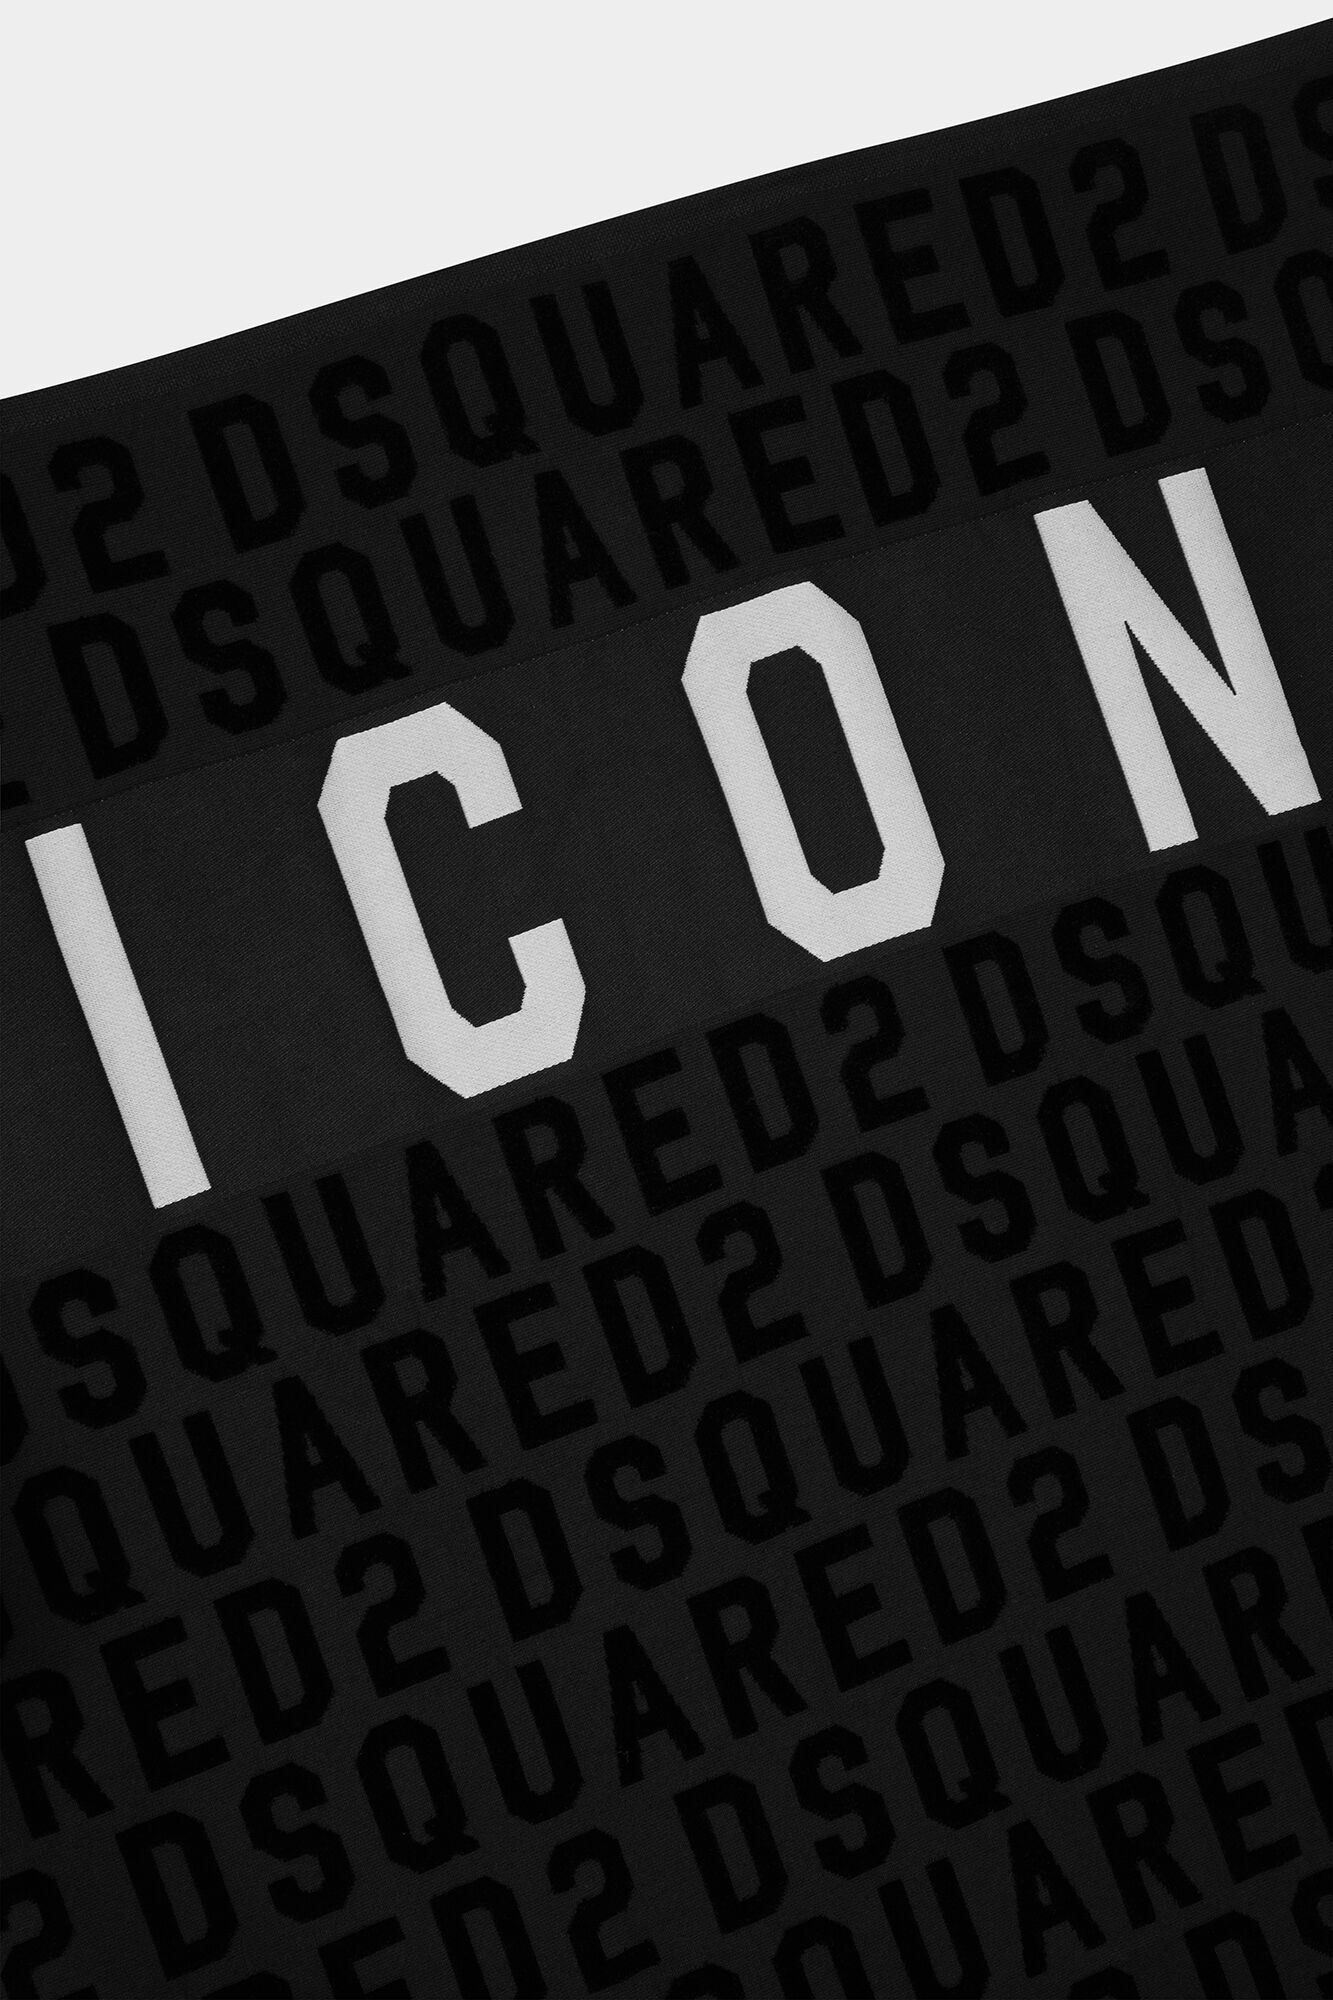 Be Icon Towel